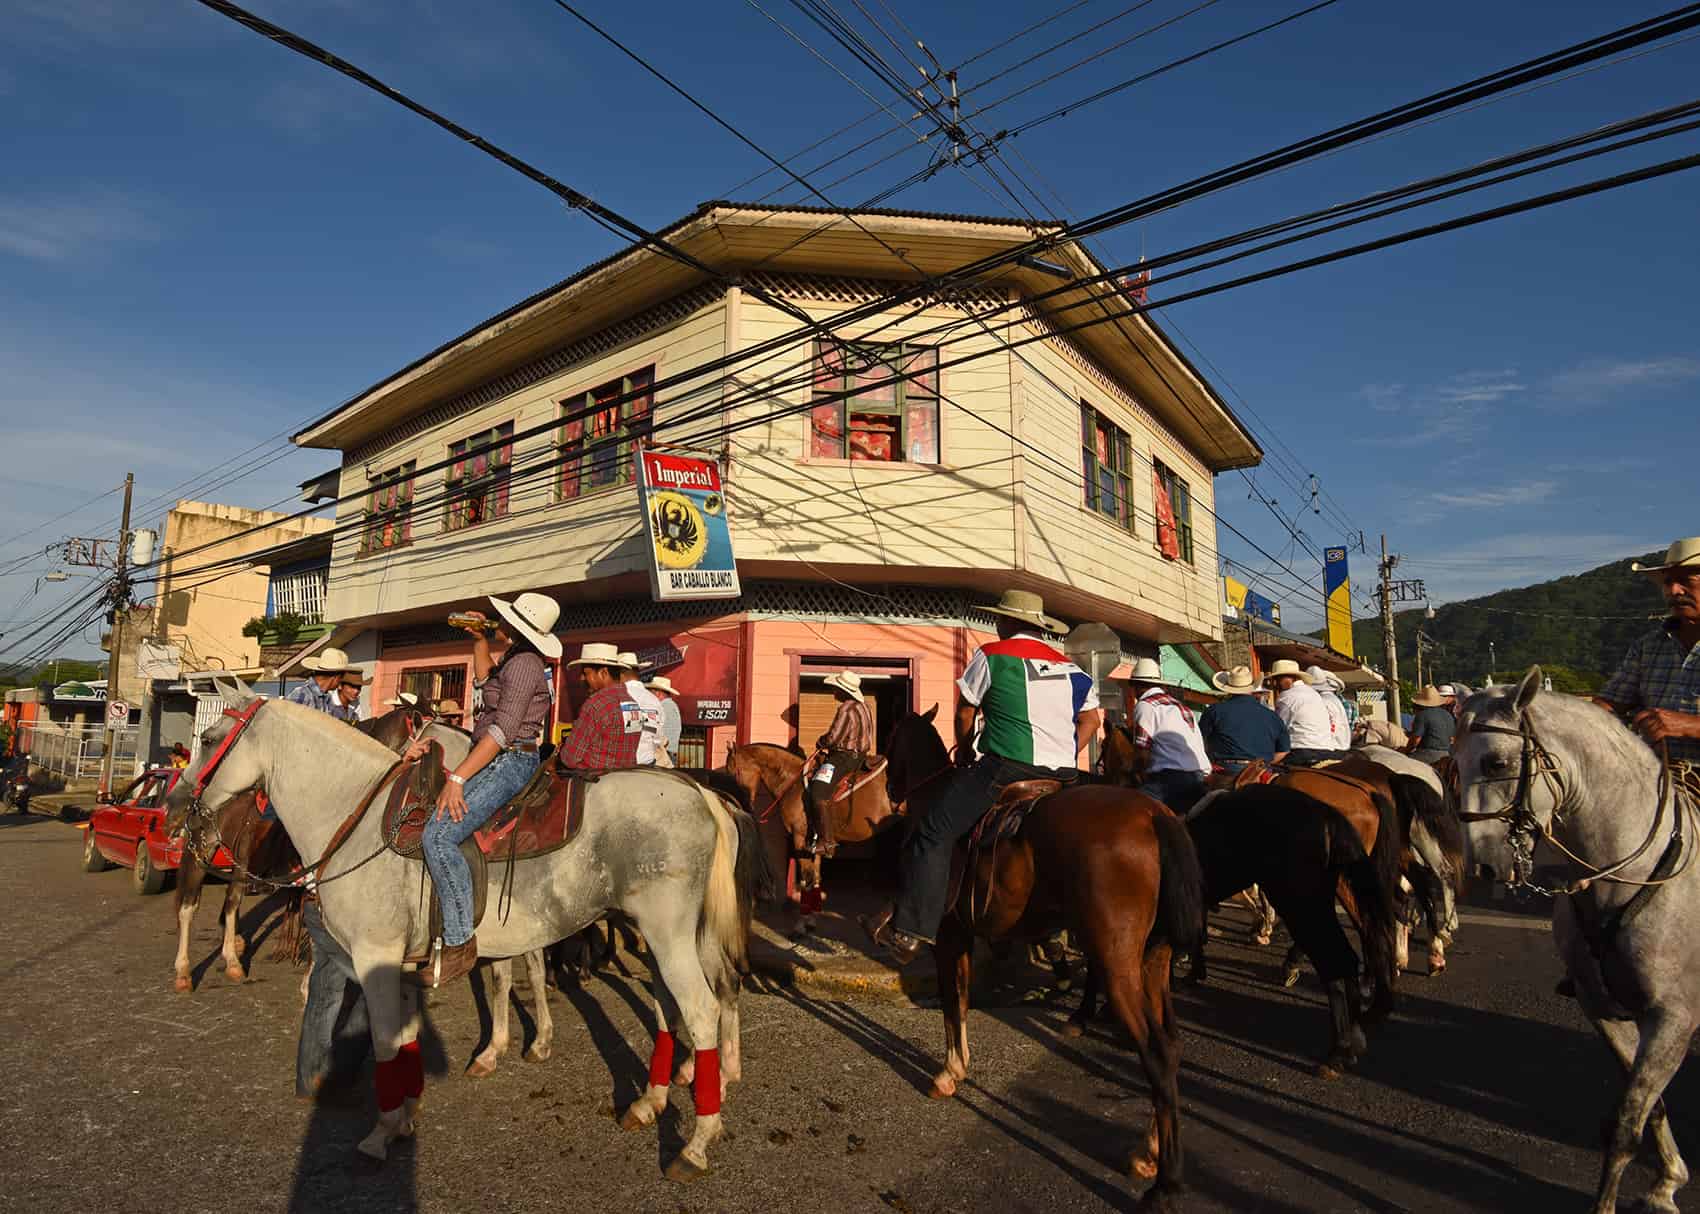 After only traveling five blocks, several riders make a quick stop to quench their thirst, another Guanacaste tradition.